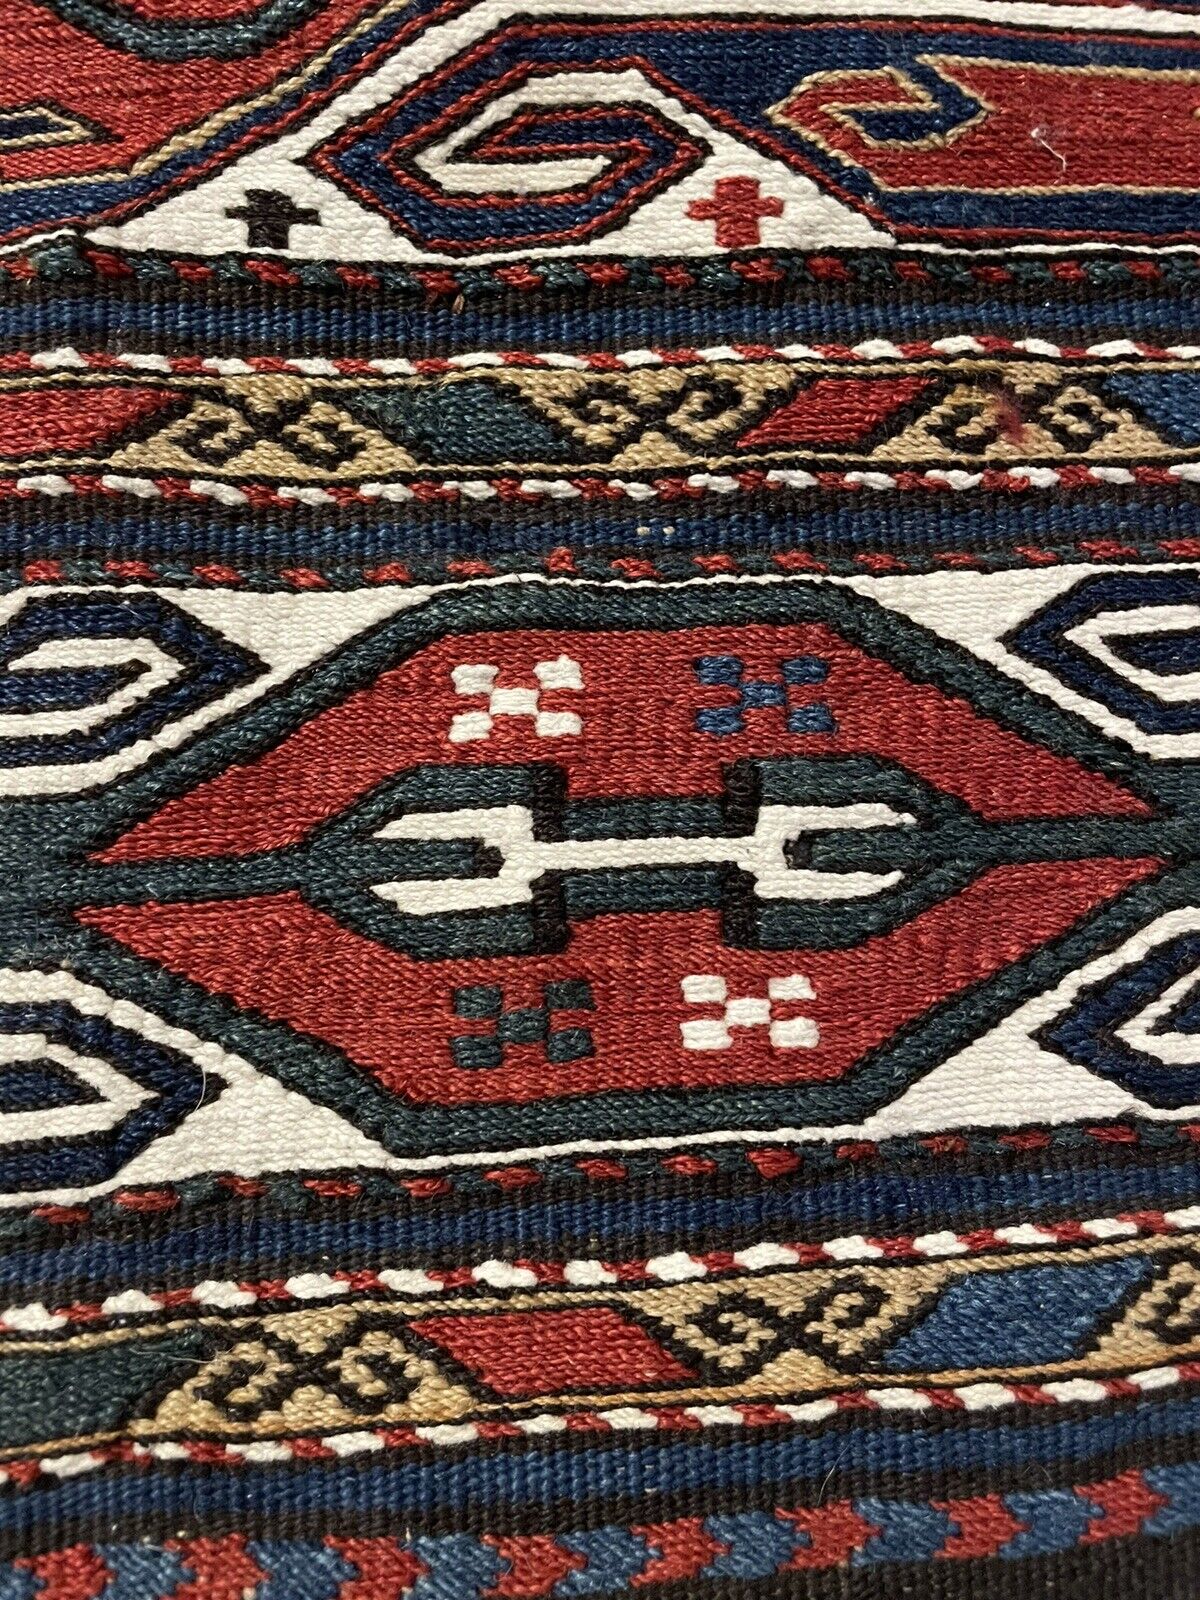 Close-up of historical significance on Handmade Antique Persian Sumak Collectible Kilim - Detailed view emphasizing the historical significance of the kilim dating back to the 1900s.